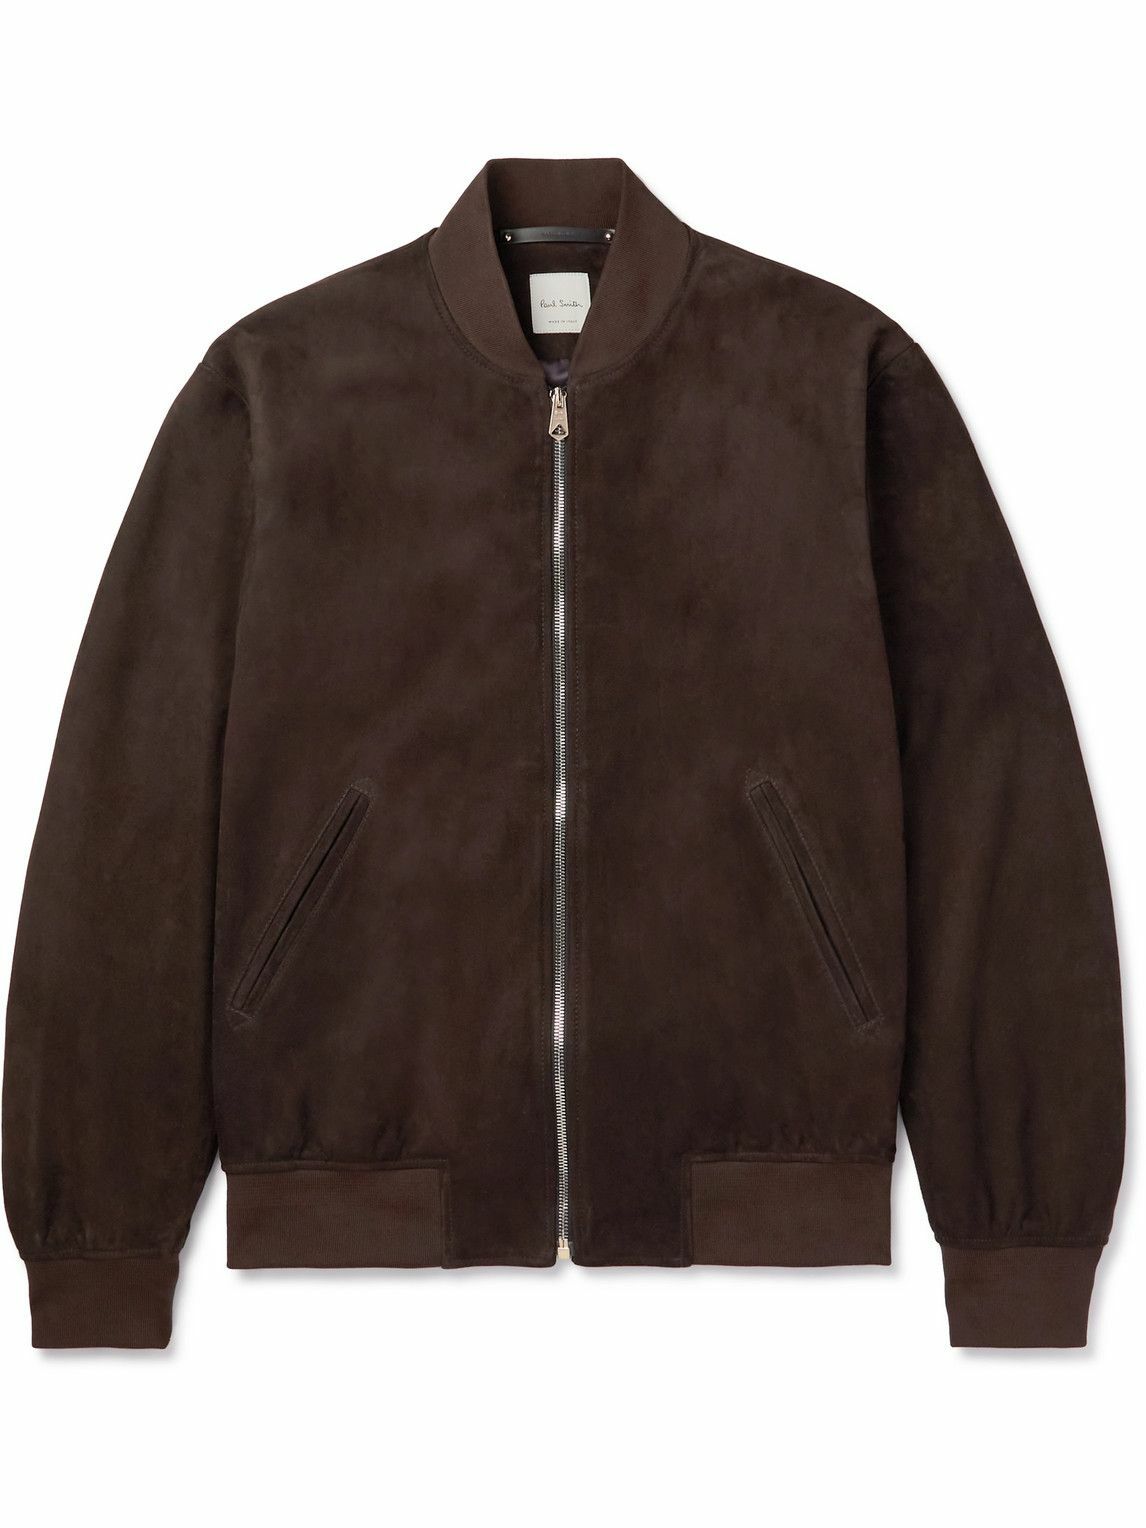 Paul Smith - Suede Bomber Jacket - Brown Paul Smith